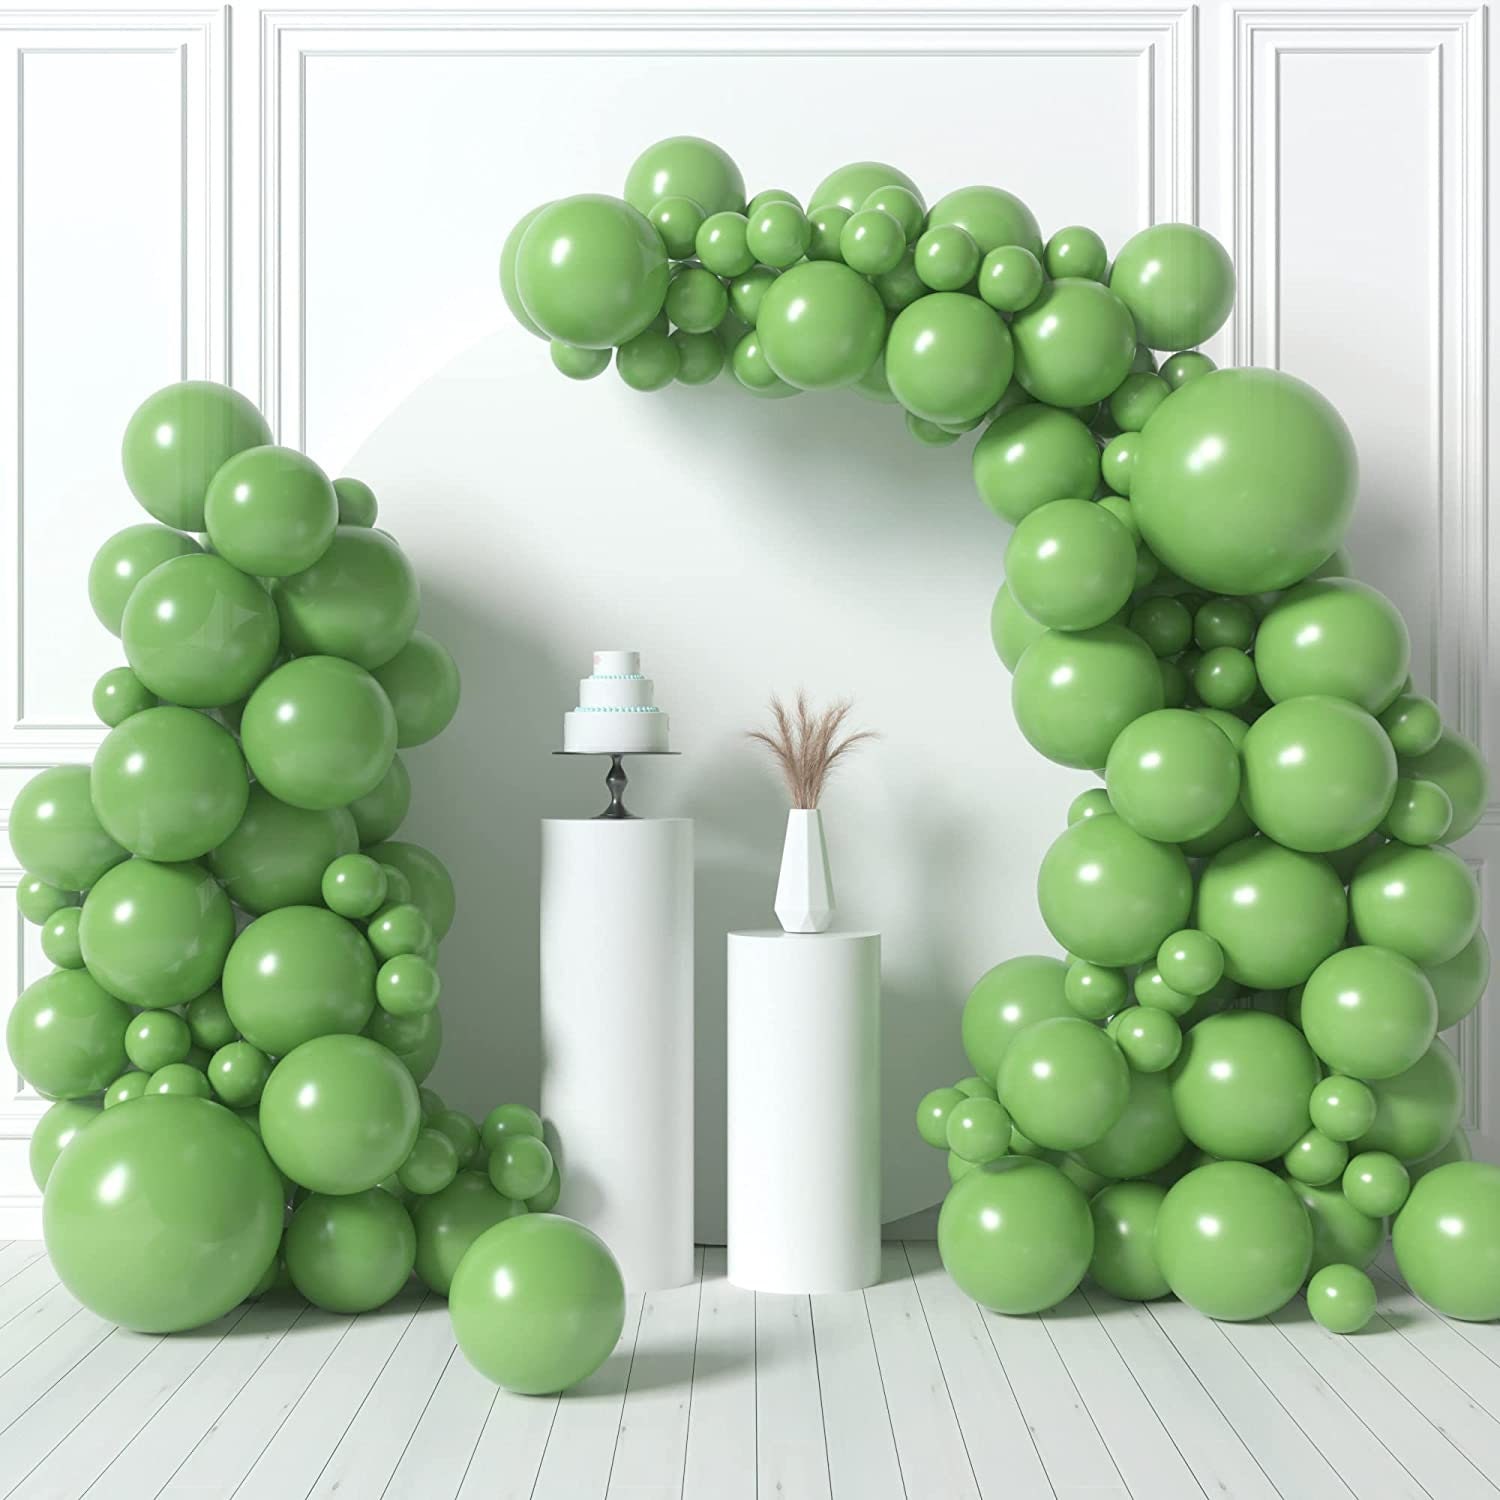 PartyWoo Green Balloons, 120 Pcs 5 inch Hunter Green Balloons, Latex Balloons for Balloon Garland Balloon Arch As Party Decorations, Birthday